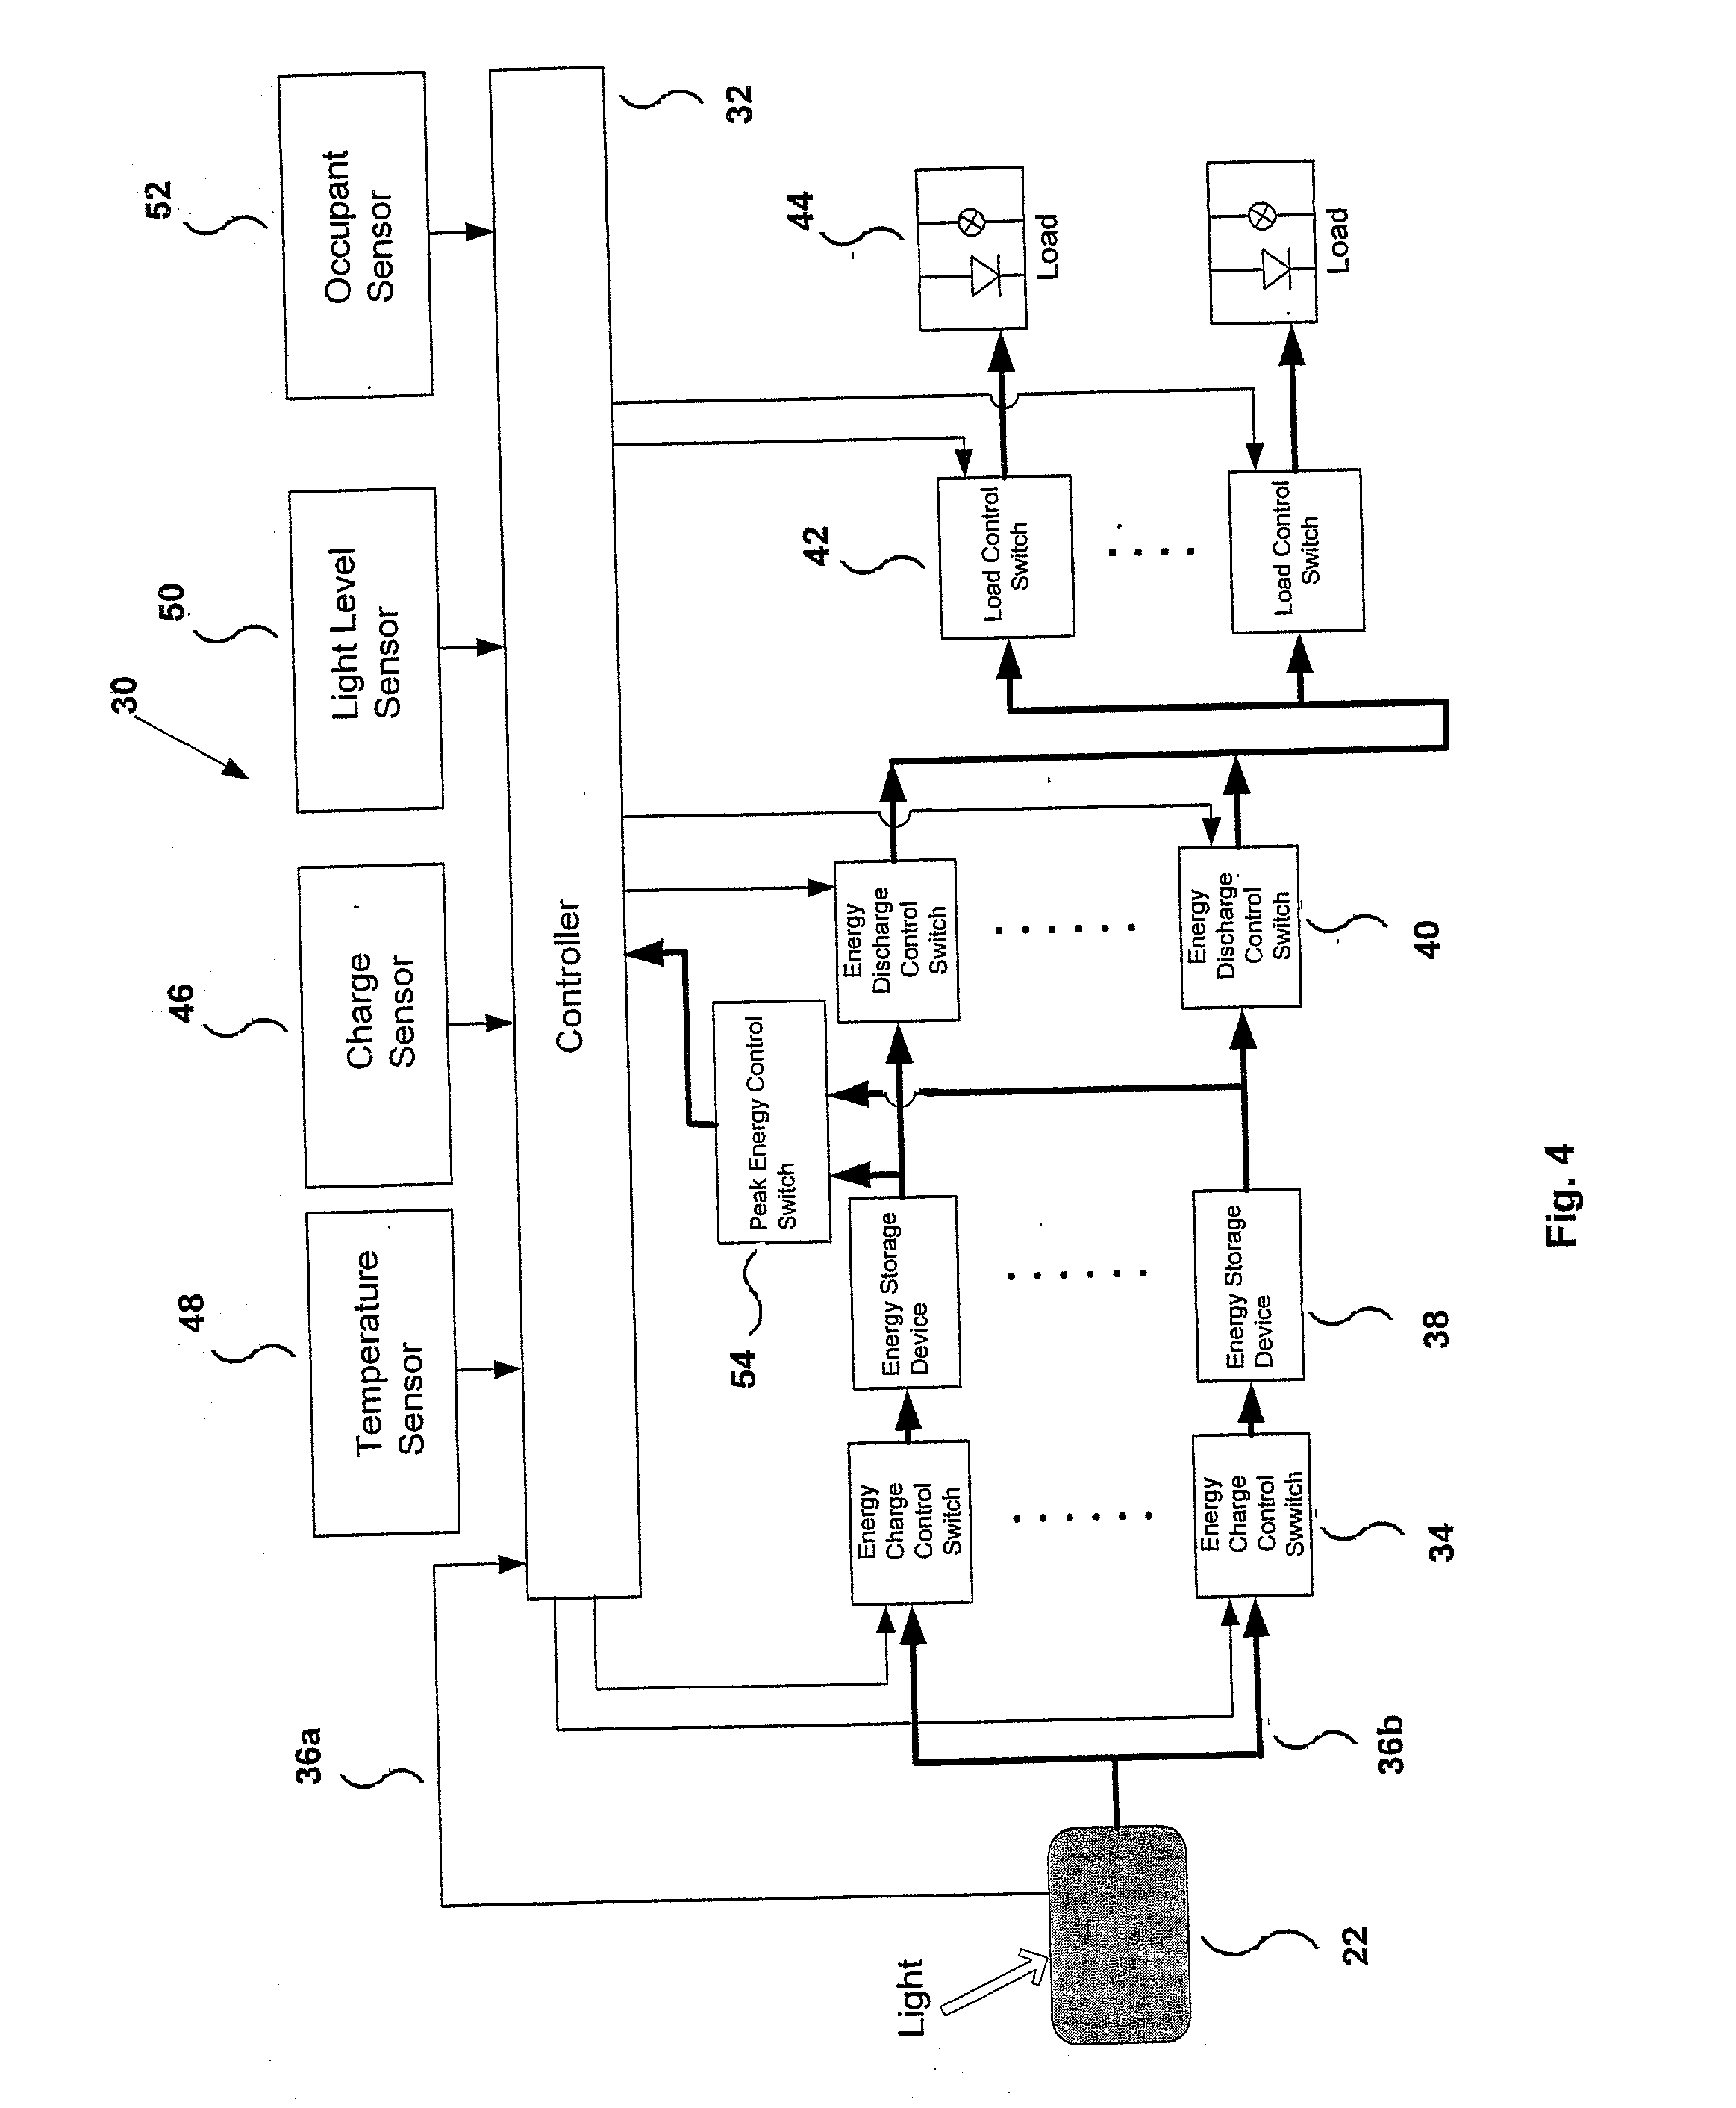 System and method of power management for a solar powered device